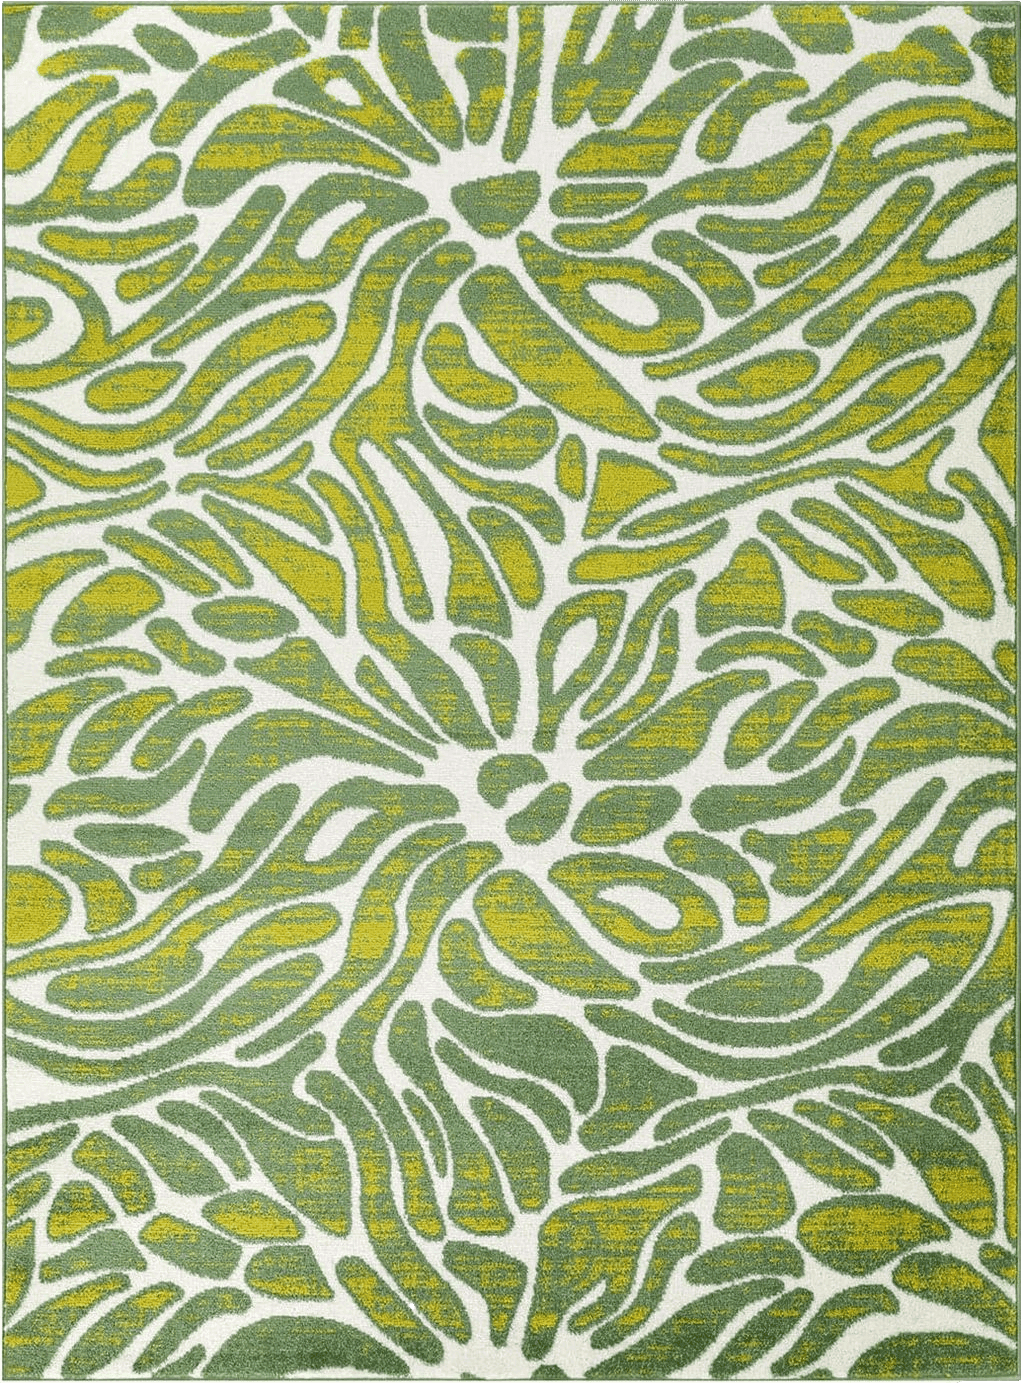 Antep Rugs Floral 5x7 Abstract Indoor Area Rug Siesta (Green White, 5'3" x 7')